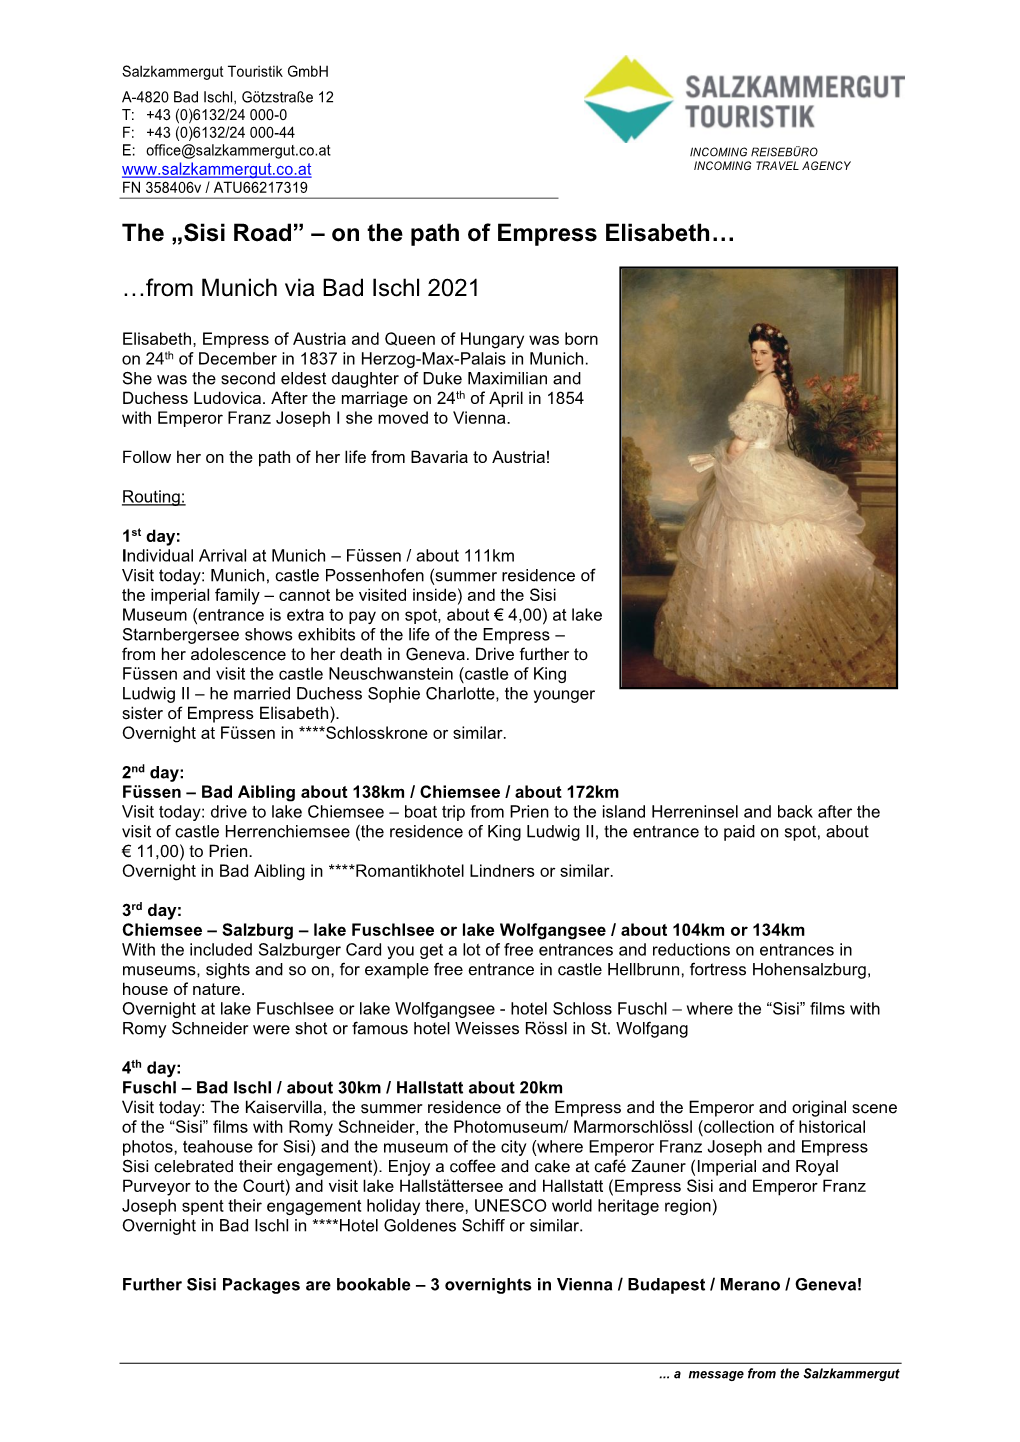 The „Sisi Road” – on the Path of Empress Elisabeth… …From